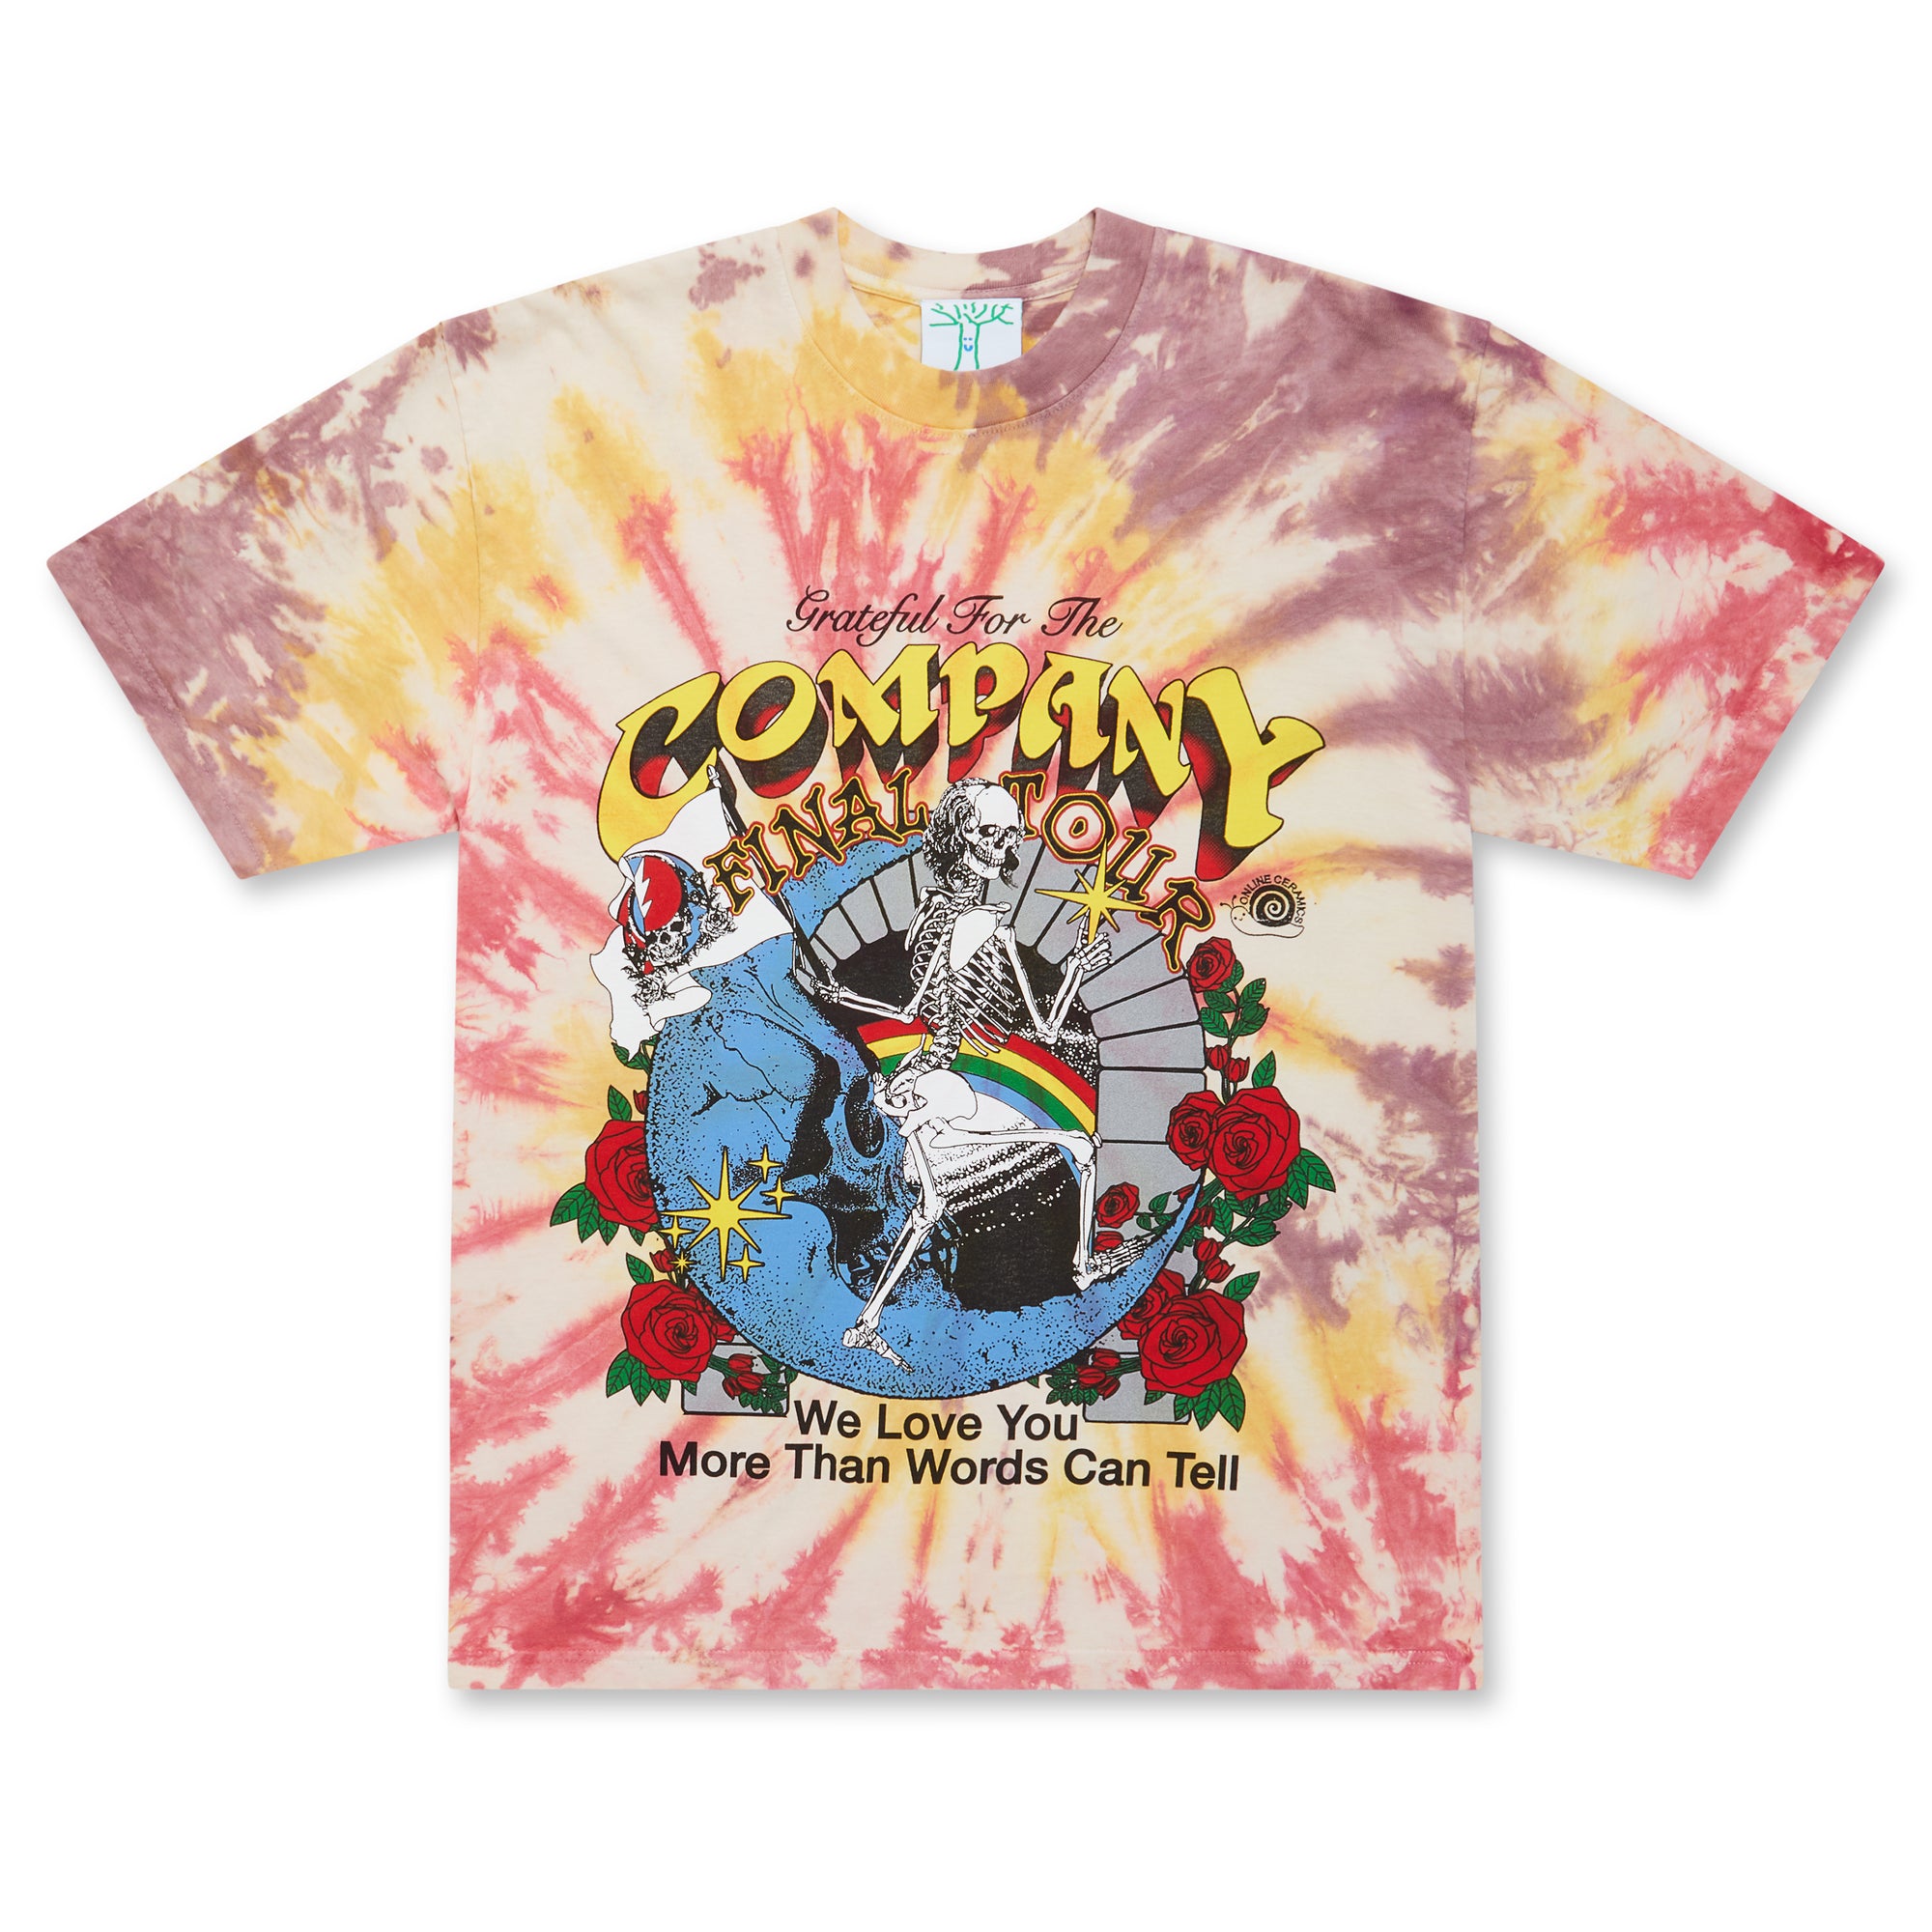 Online Ceramics - Grateful For The Company Tee - (Tie-Dye) view 1